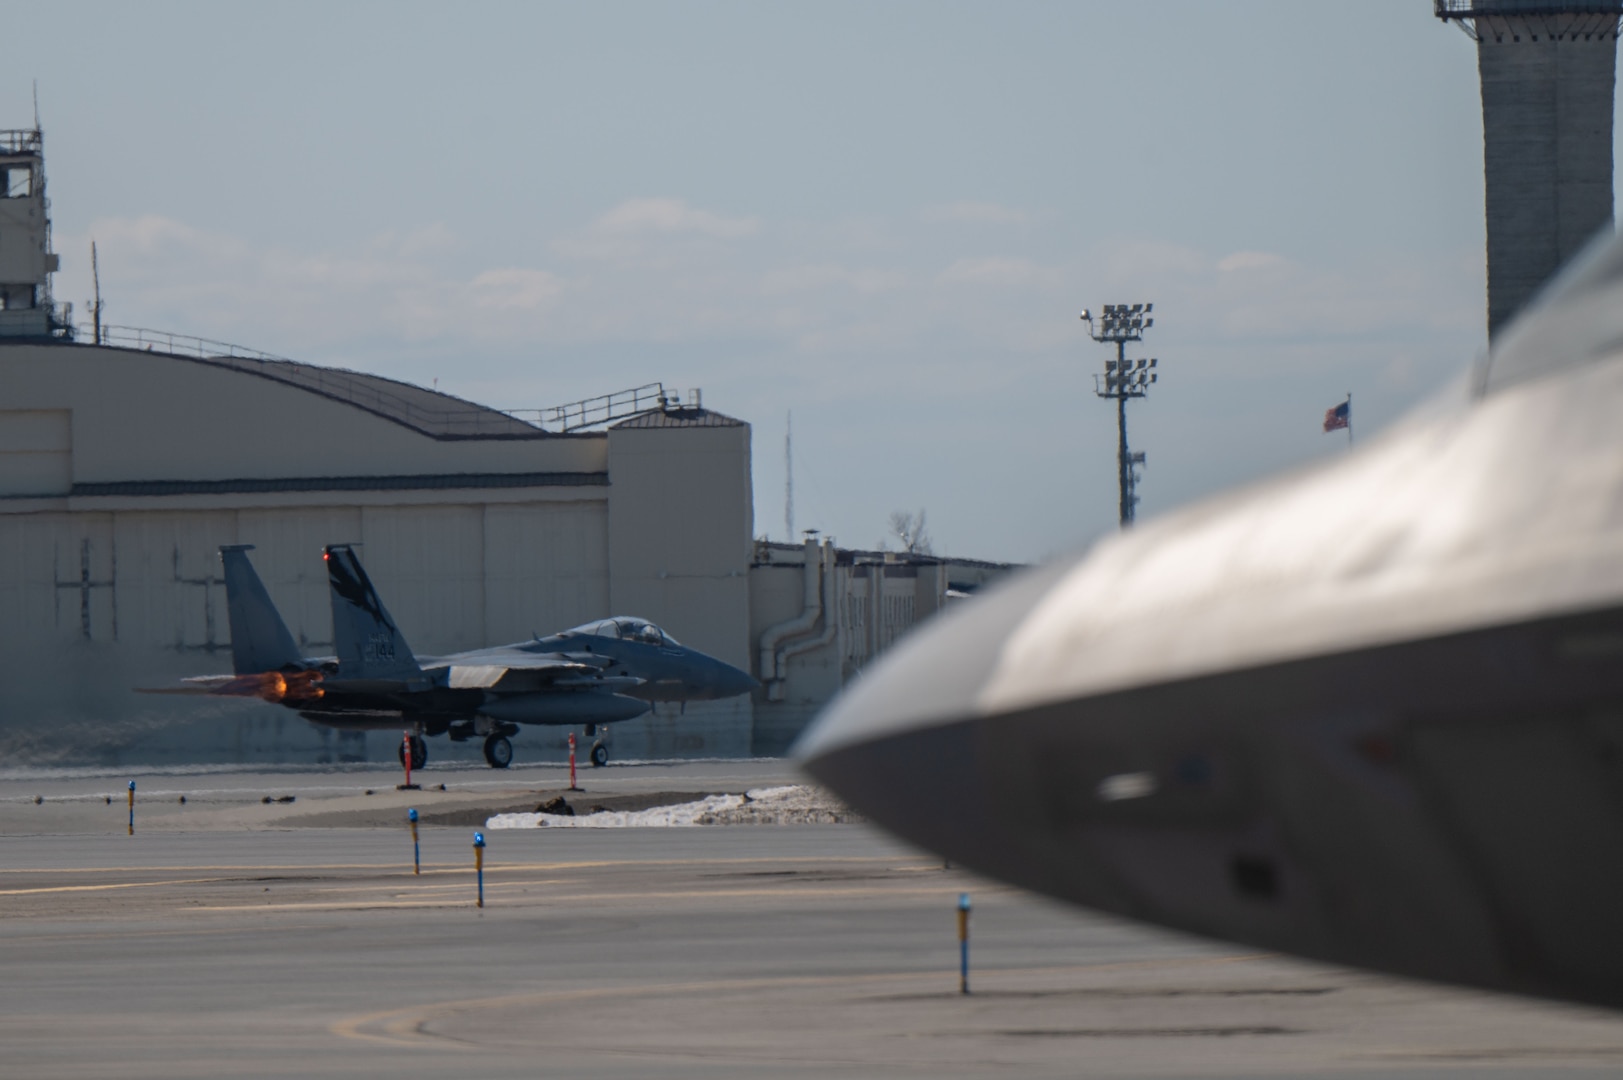 A photo of an F-15 Eagle taking off next to the nose of an F-22 Raptor.